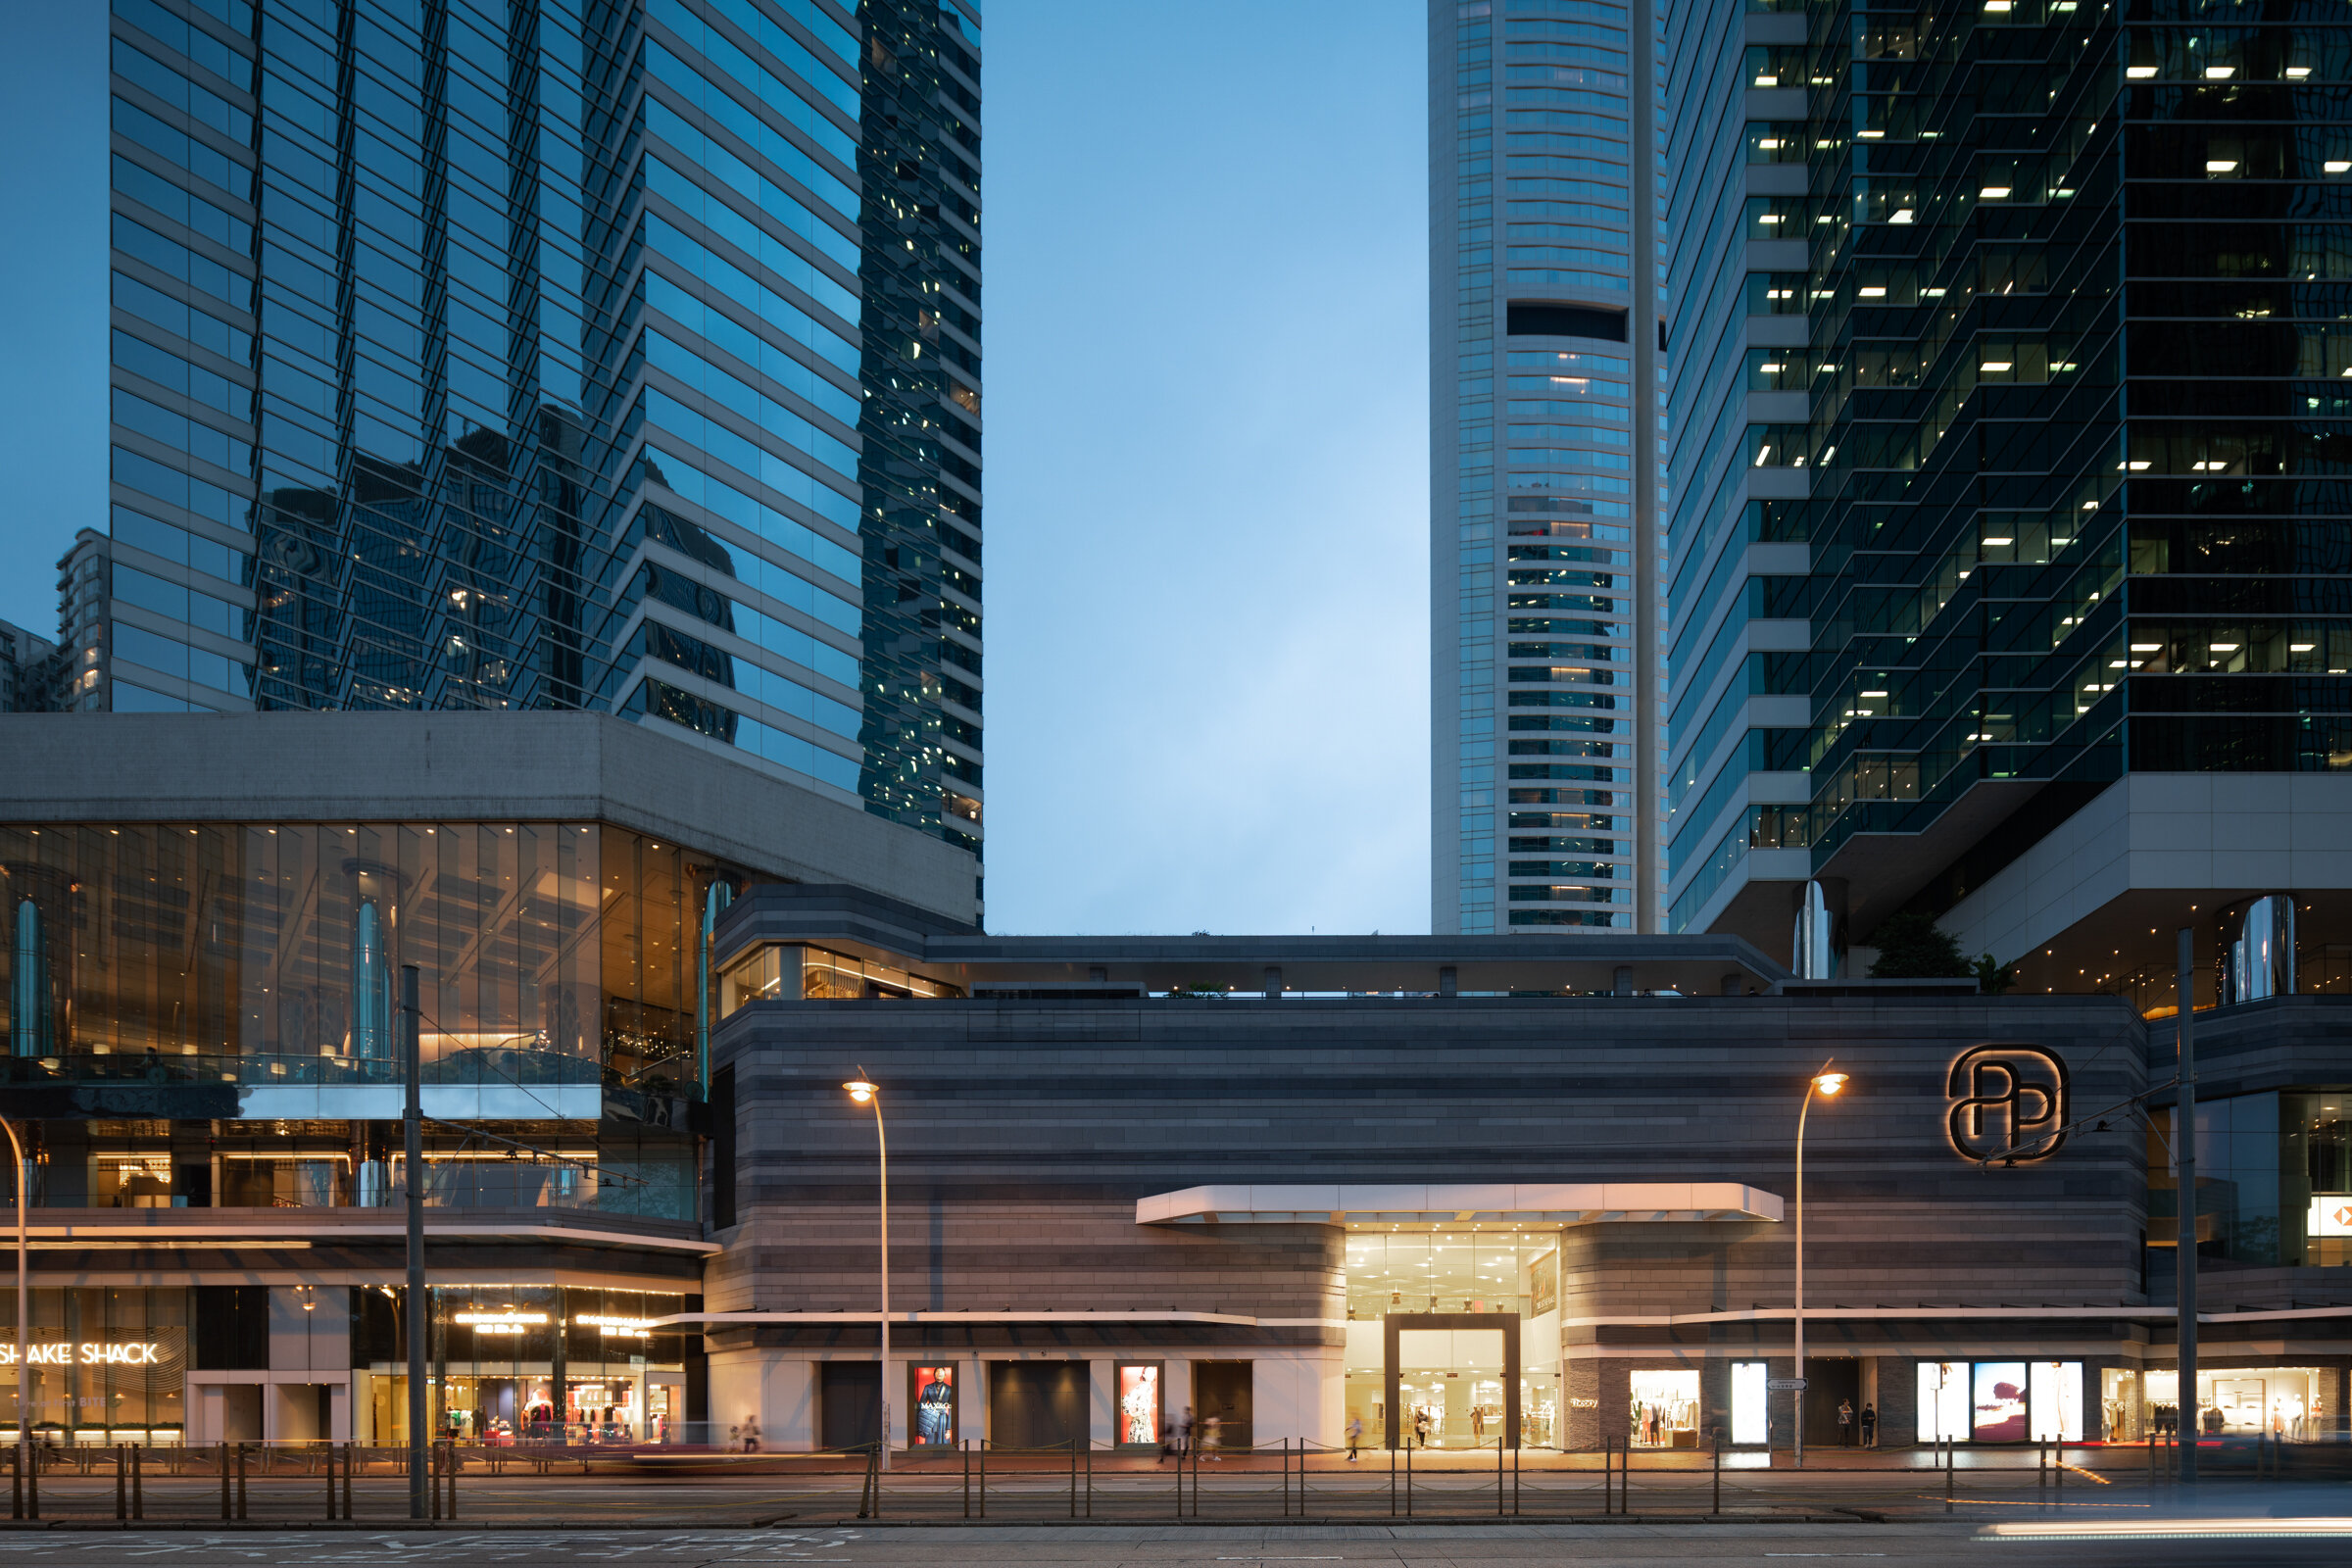  Pacific Place Developed by Swire Properties  Photographed for Swire Properties 